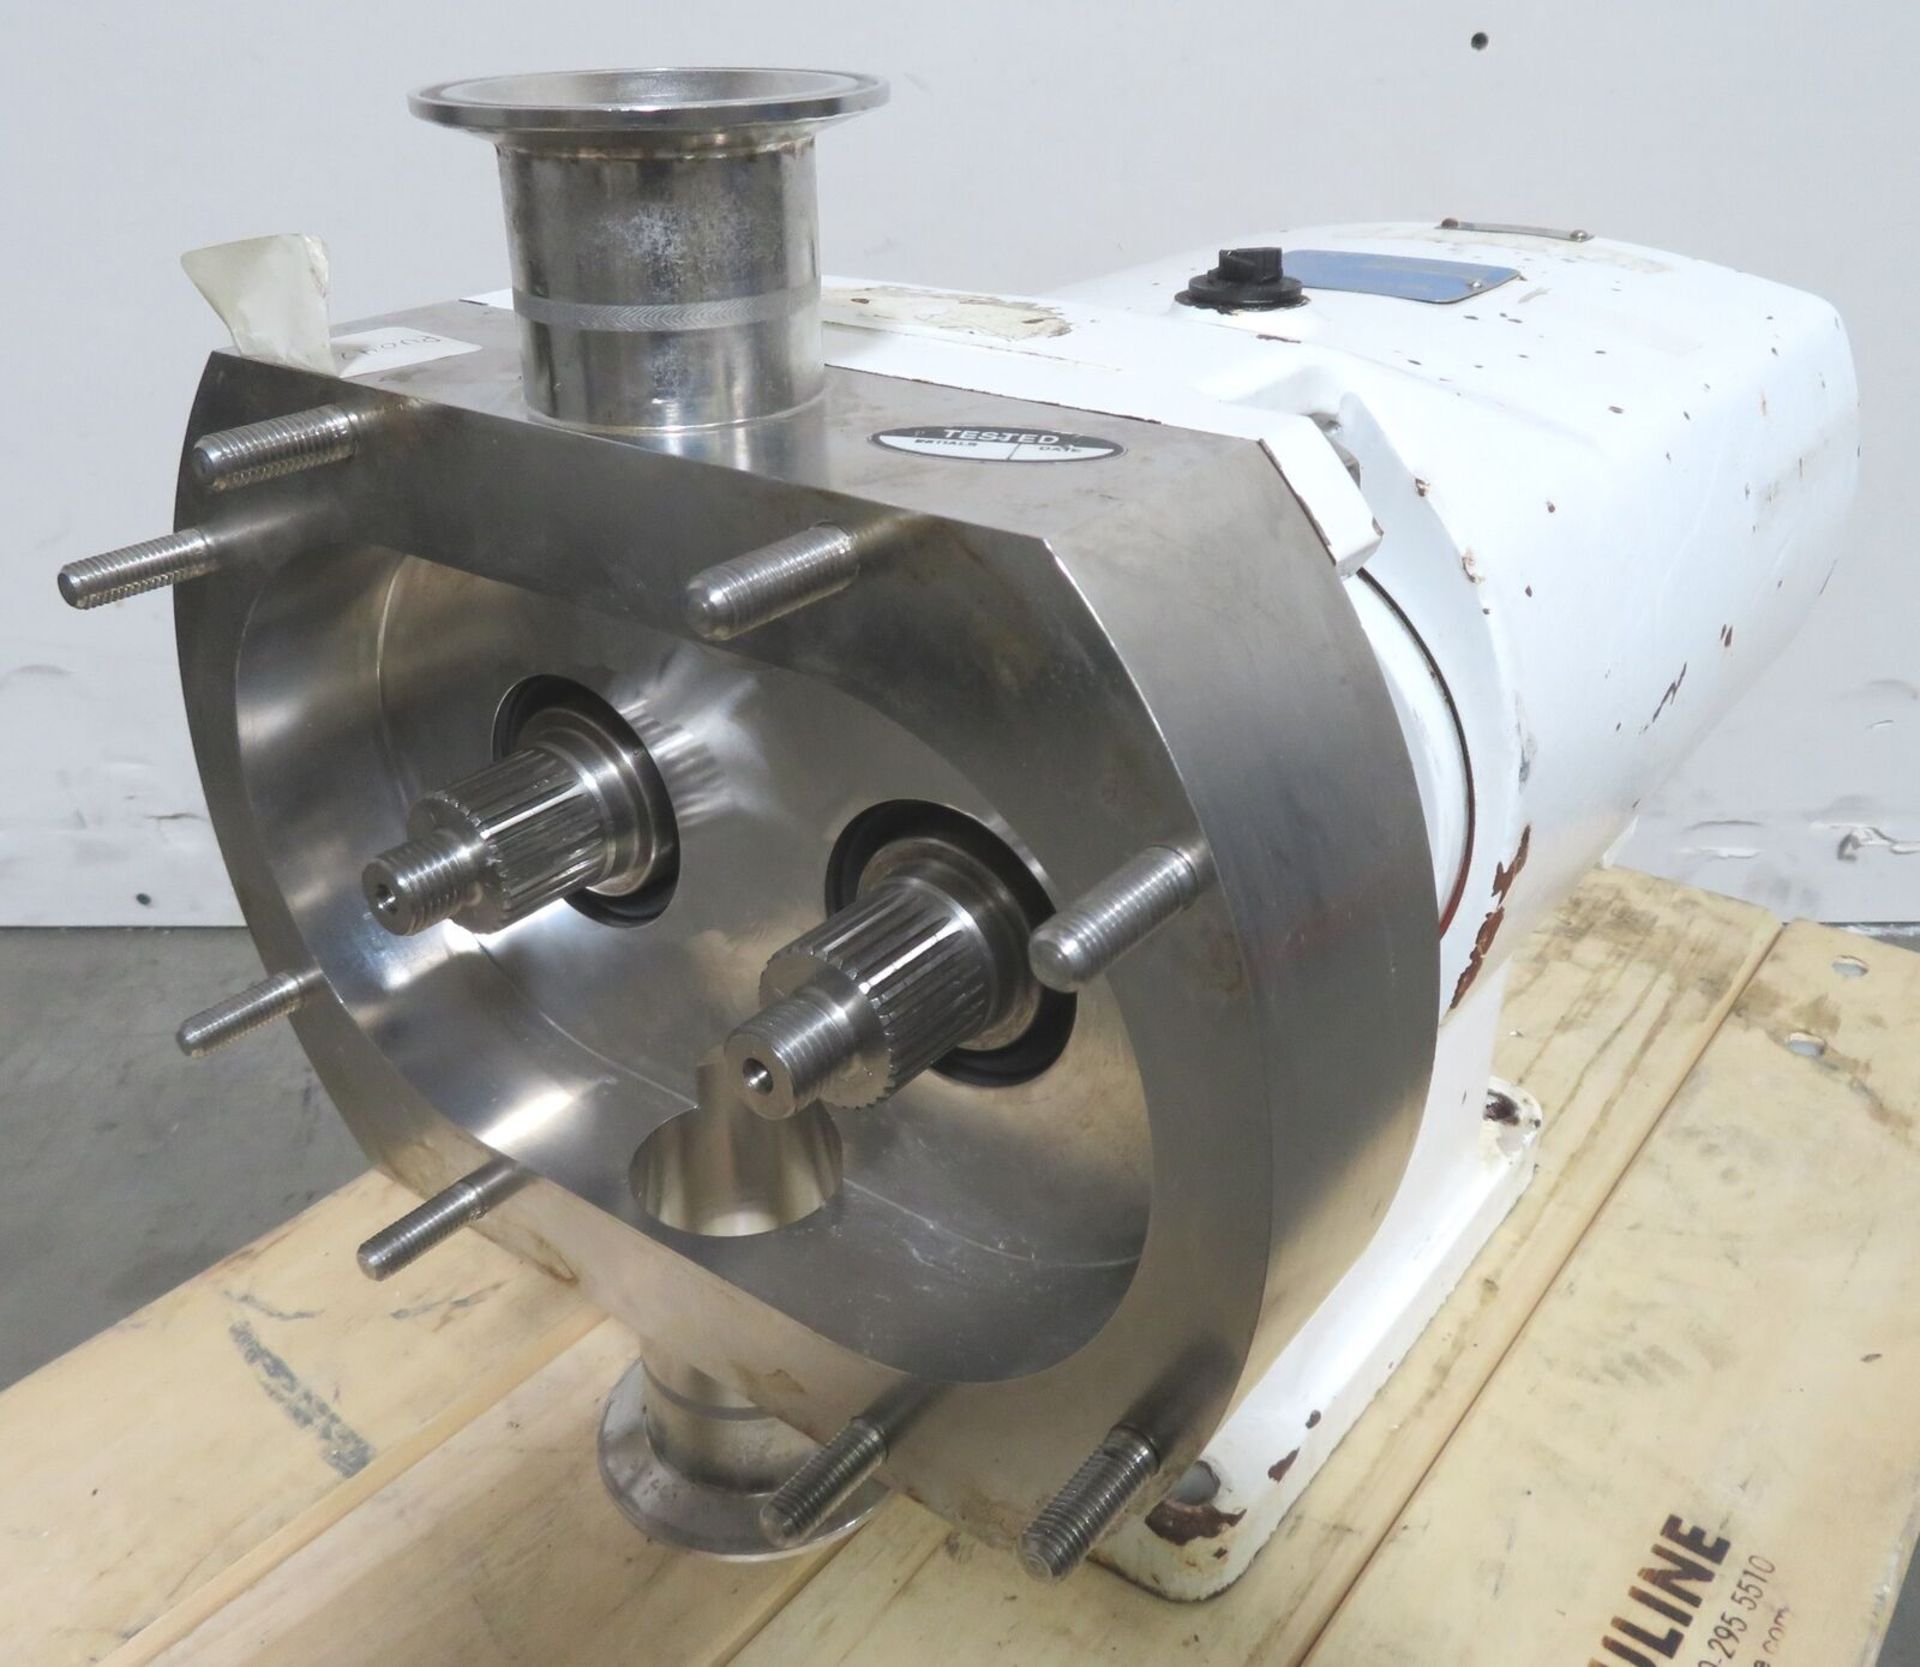 G&H Products 622 Rotary Lobe Pump Head (1-7/8"ID, 3"OD Sanitary Flanges) - Gilroy - Image 5 of 9